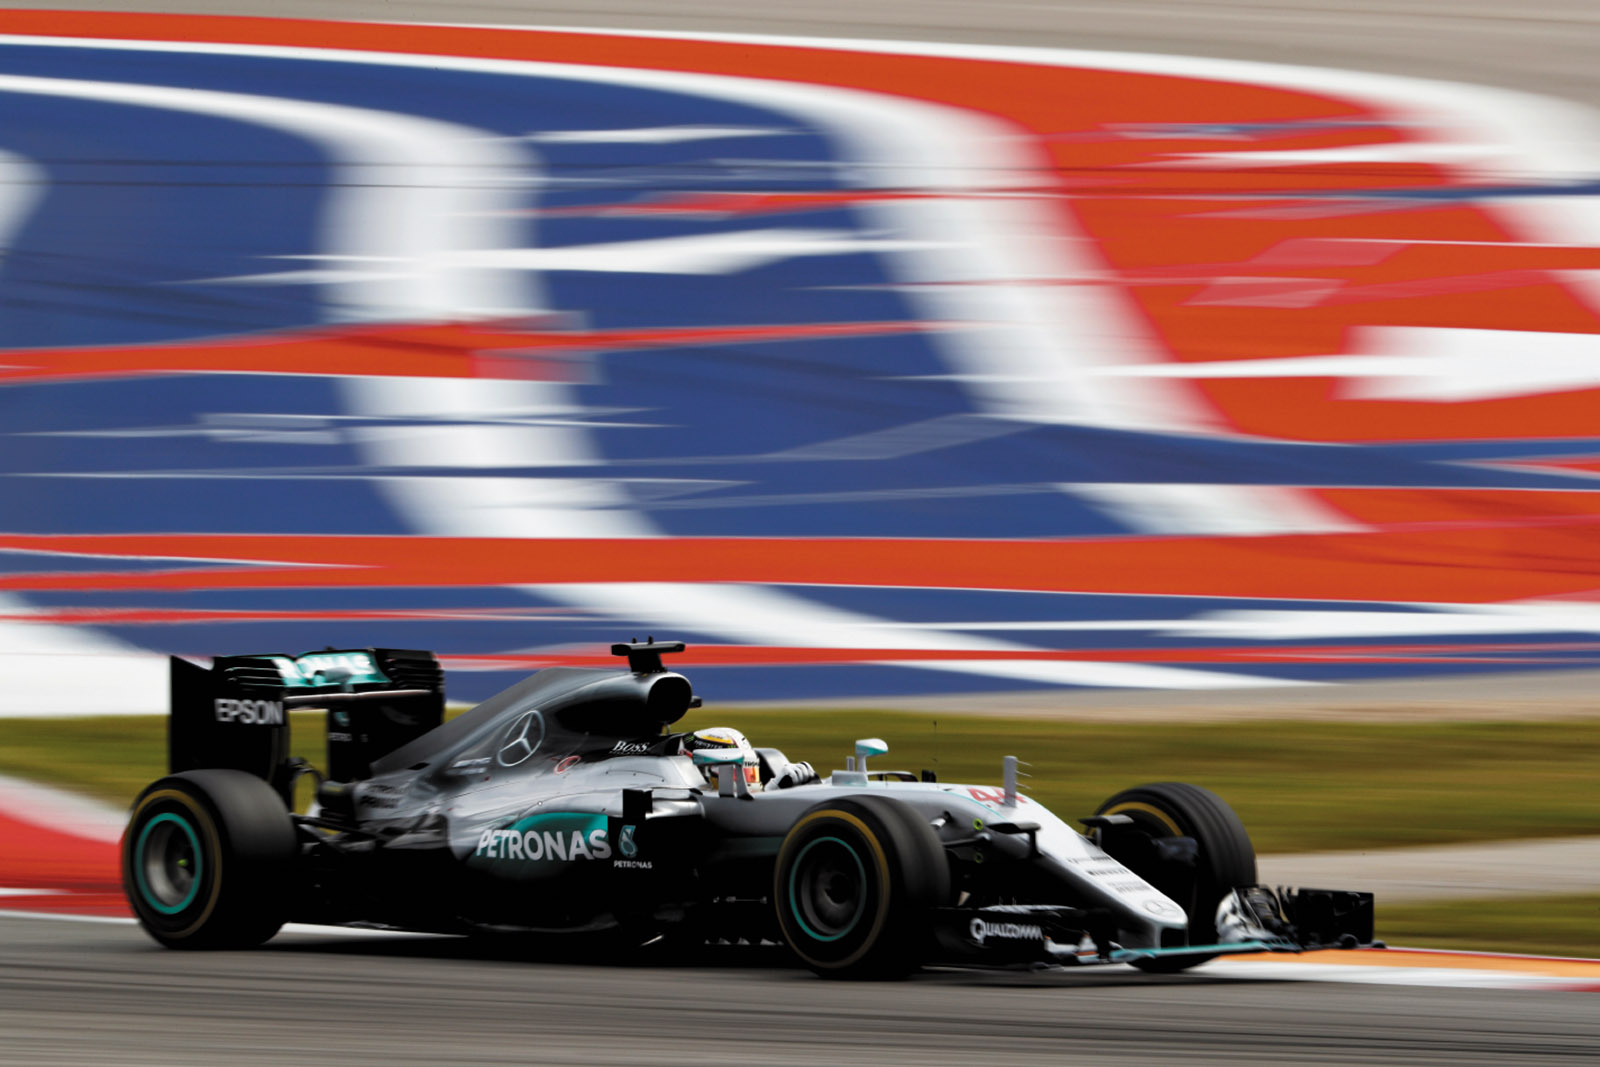 Lewis Hamilton racing at the Circuit of the Americas, October 2016